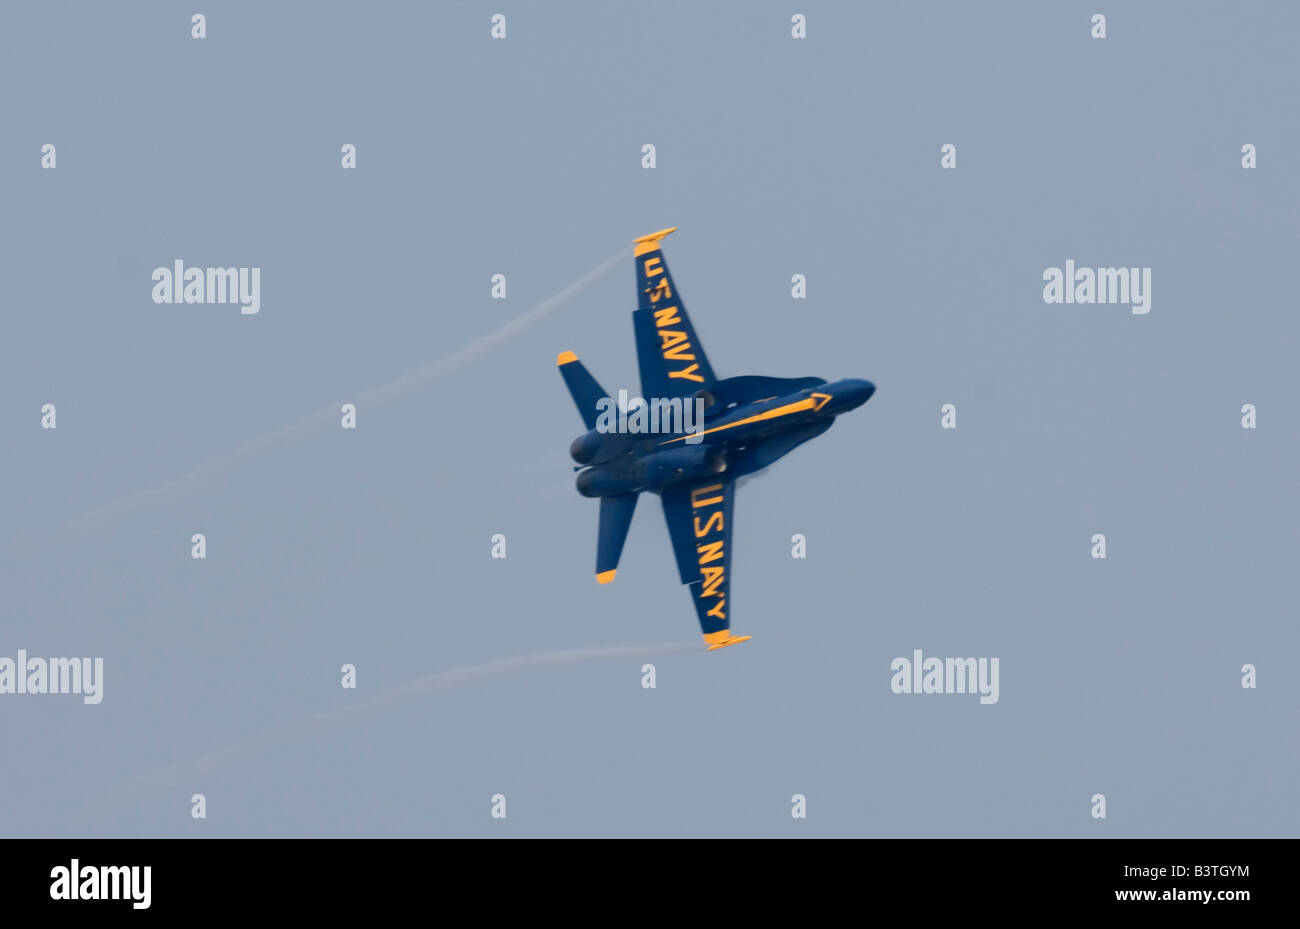 Boeing F/A-18 jets of the US Navy Blue Angels flight demonstration team perform at their summer base, NAS Pensacola Florida. Stock Photo